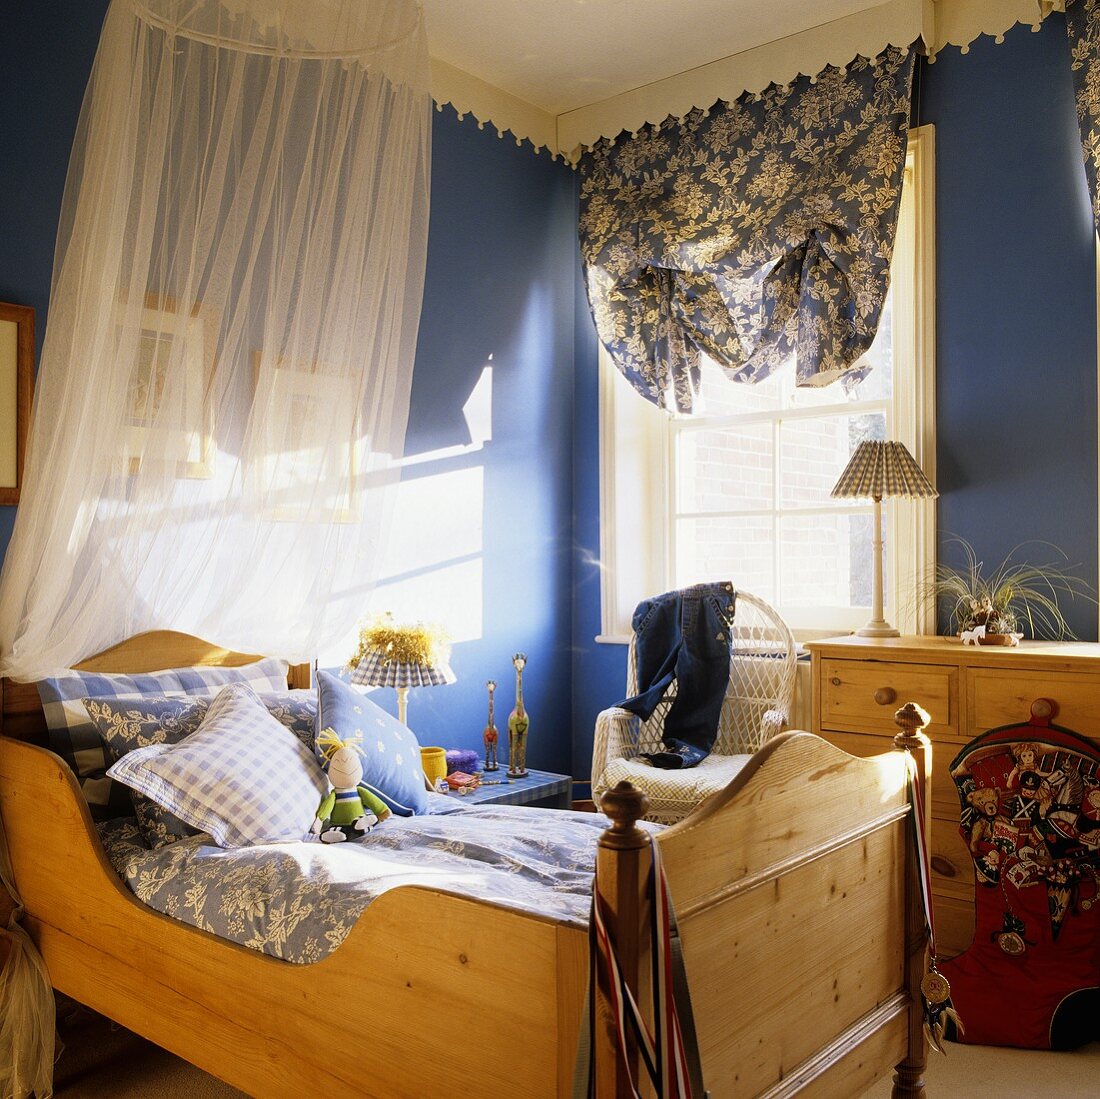 A children's bedroom with a wooden bed and a canopy with light playing onto a blue wall